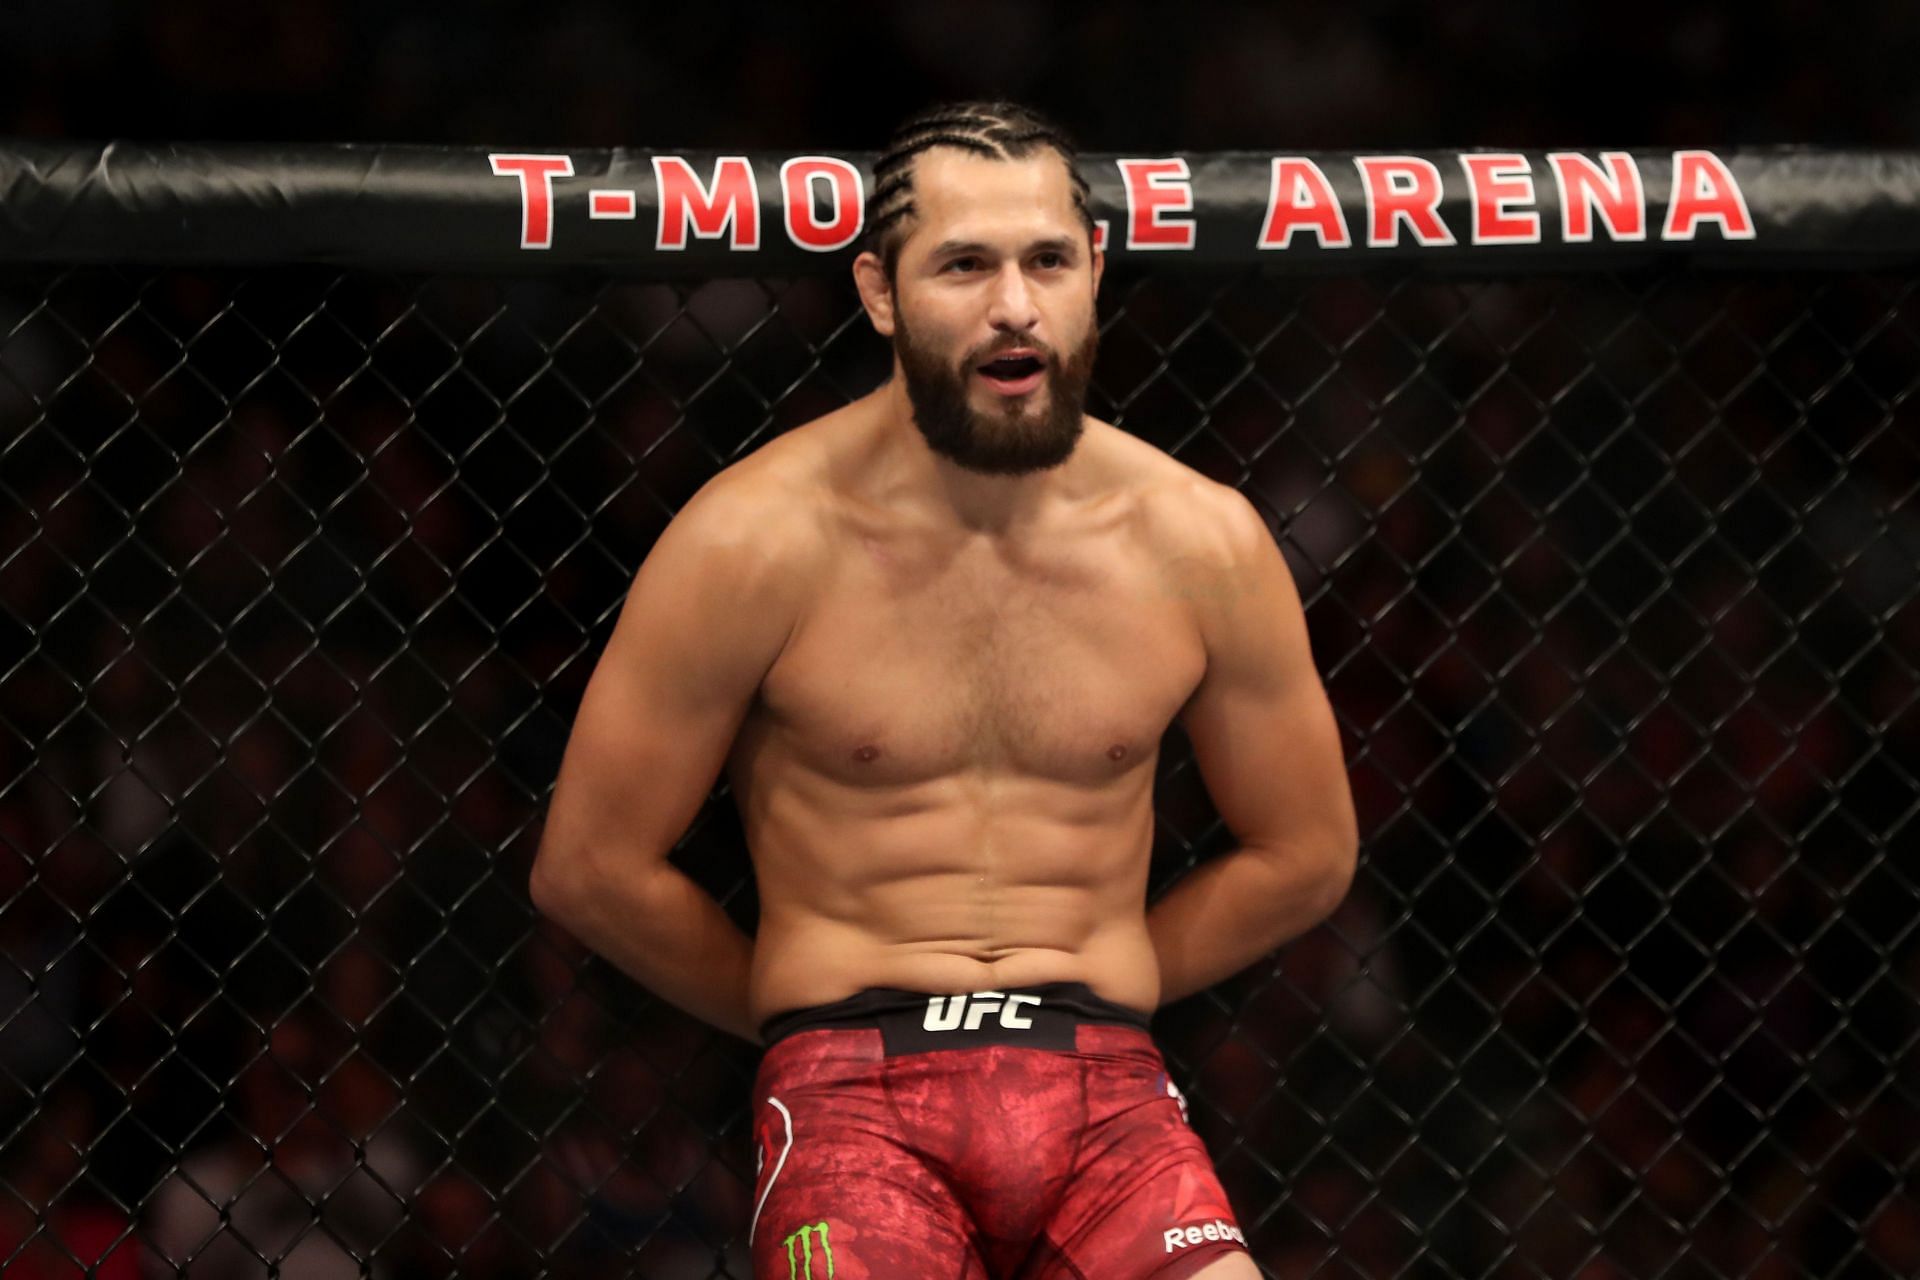 A fight between Masvidal and McGregor could be a thrilling one to watch